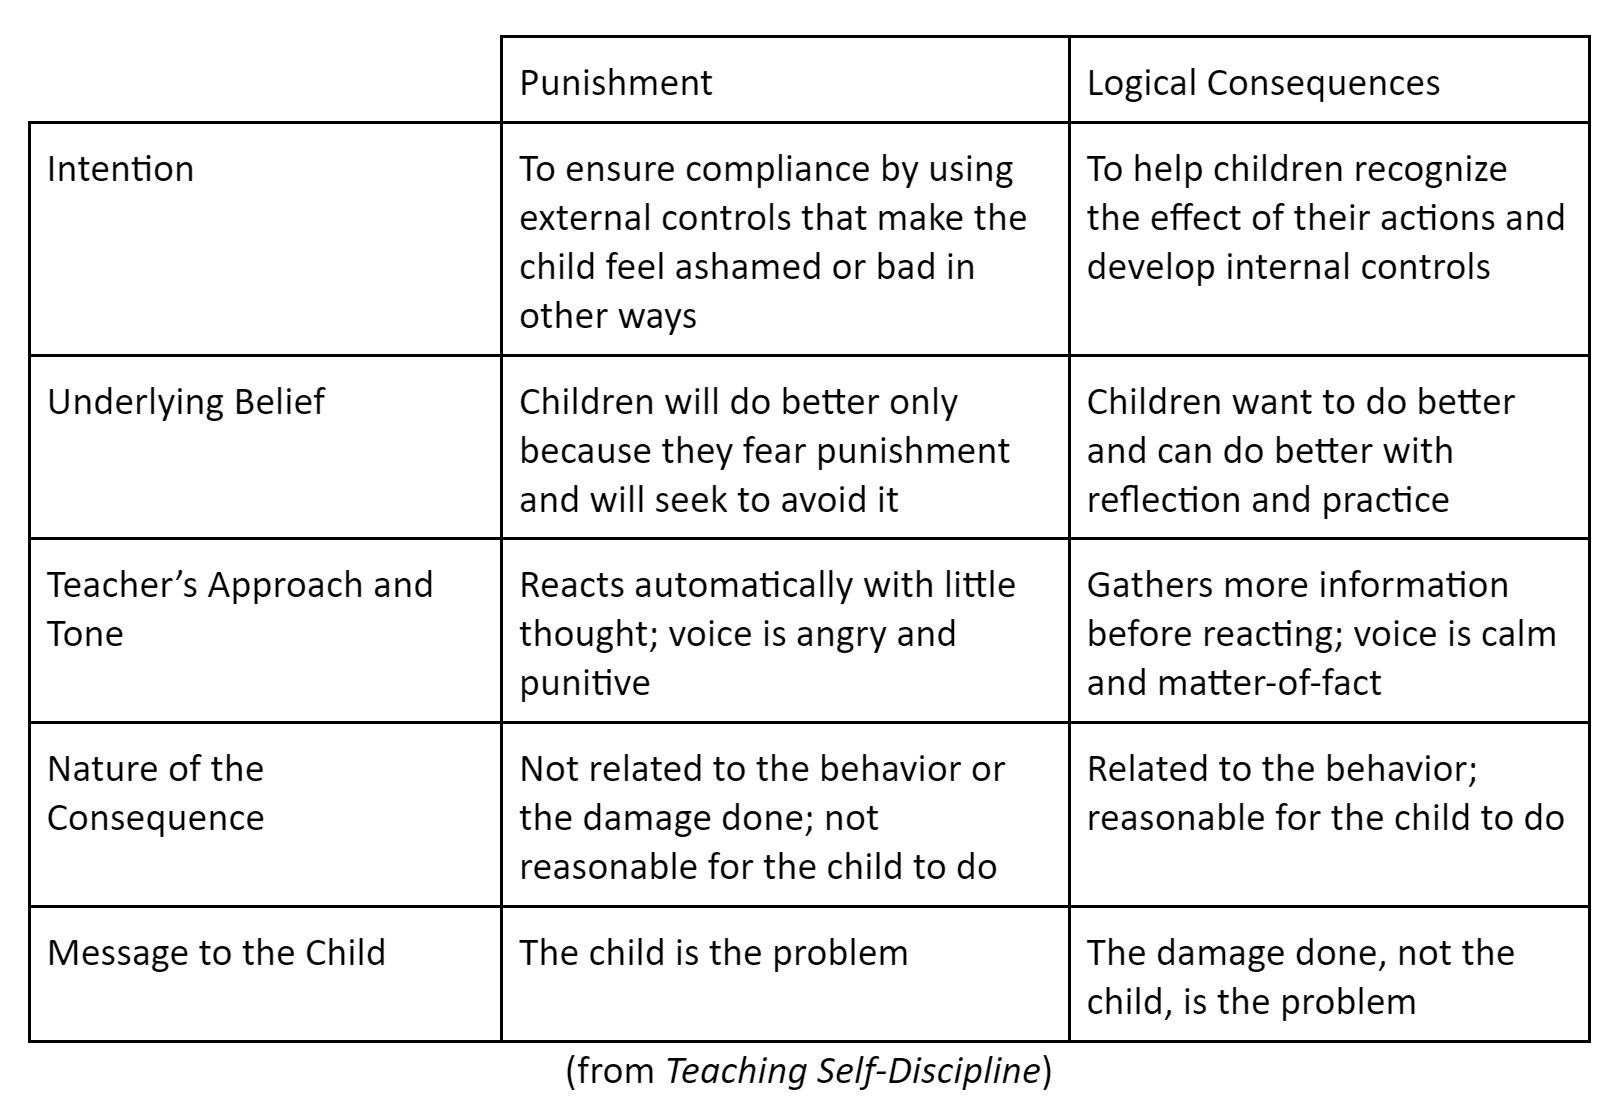 How Logical Consequences Are Different From Punishment Responsive Classroom